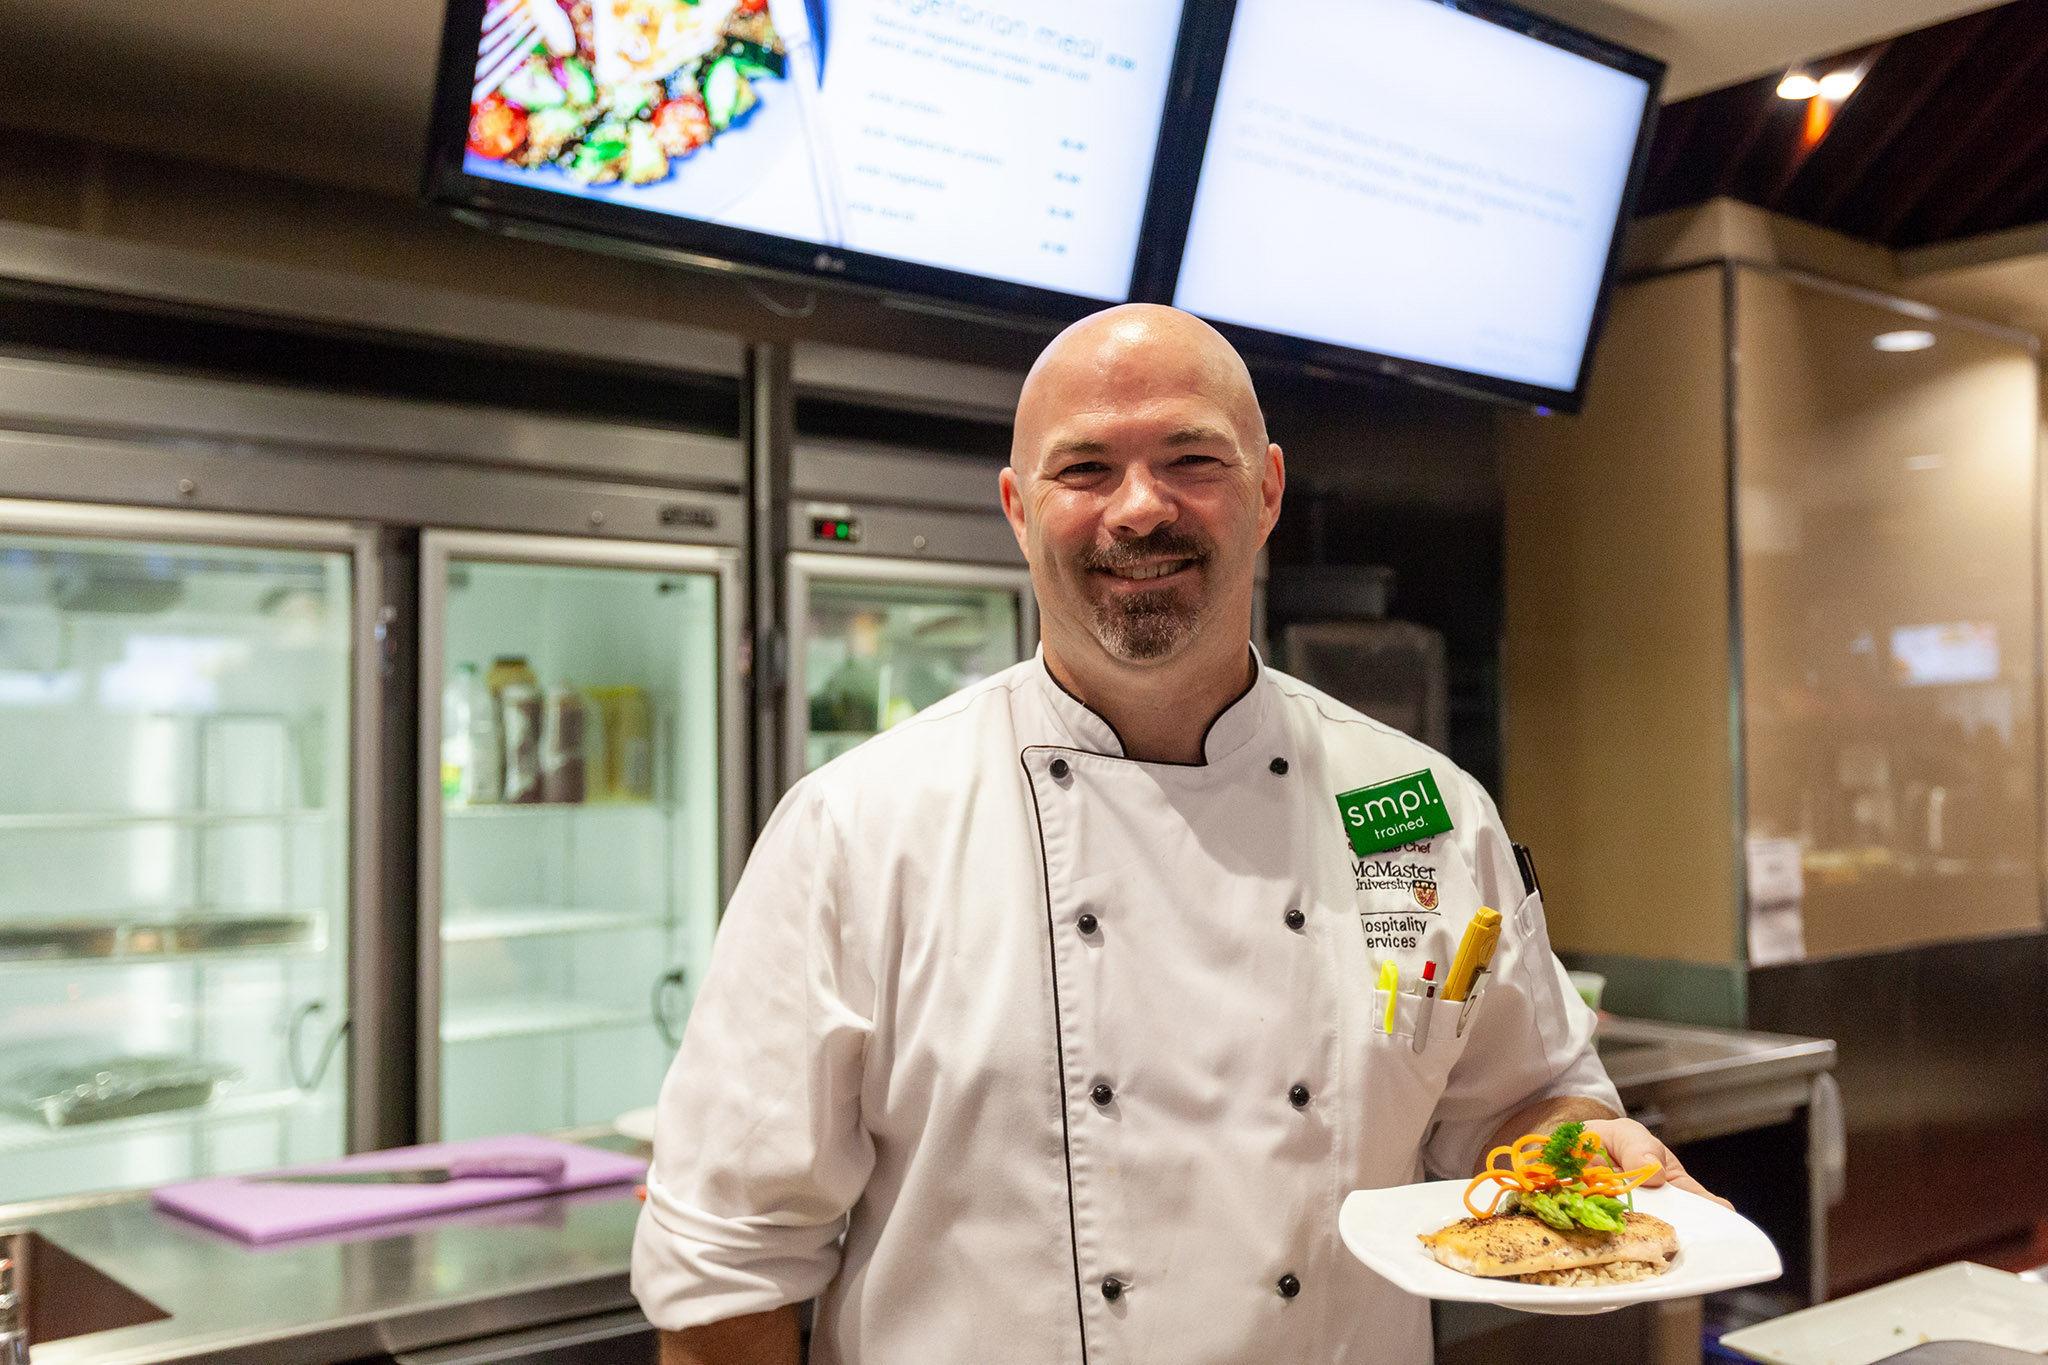 Photo of chef smiling holding plate of salmon and asparagus